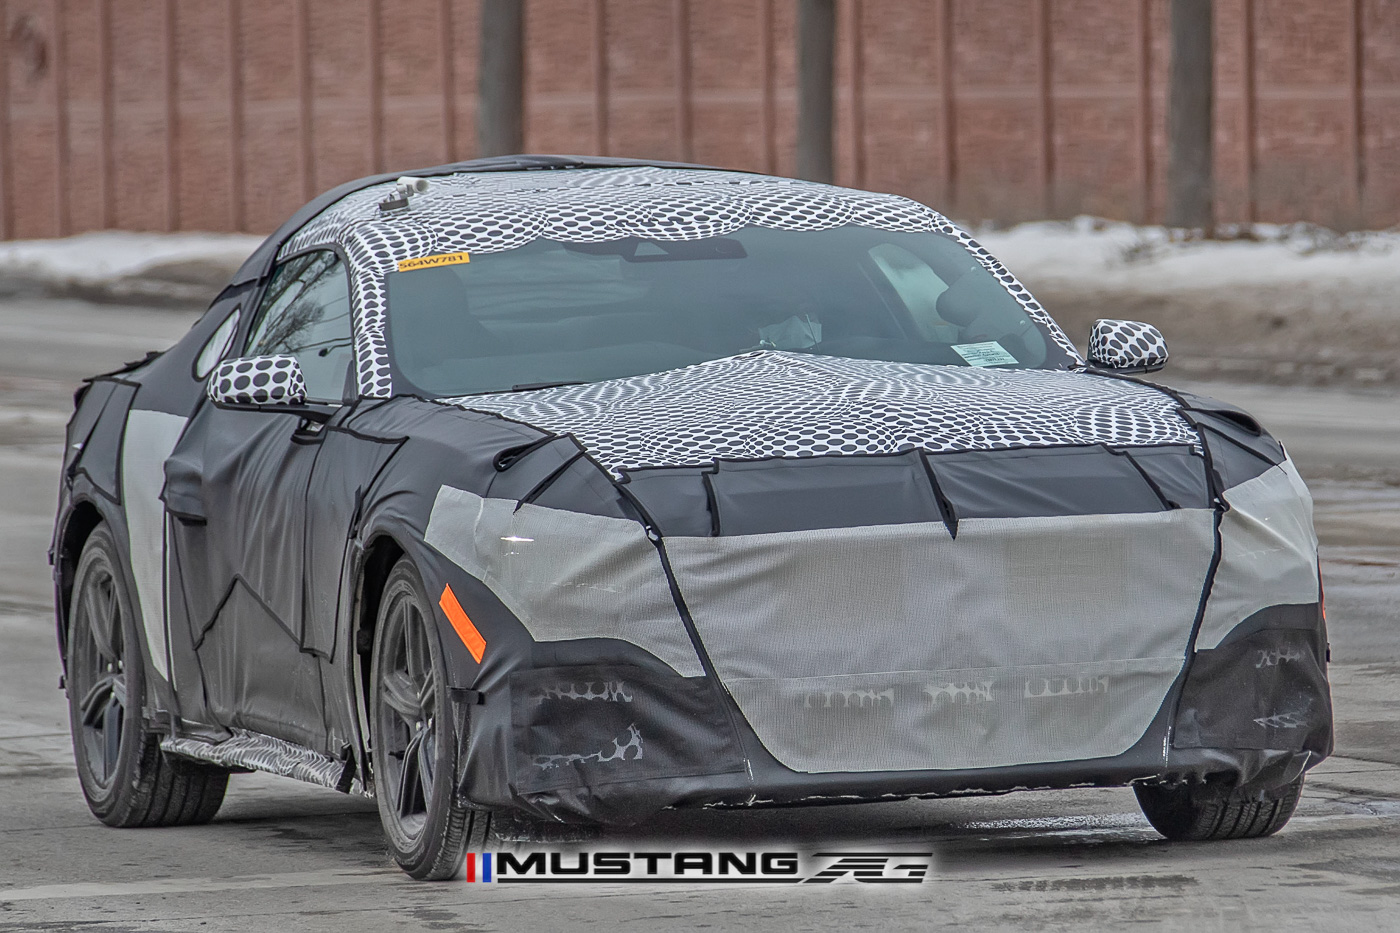 S650 Mustang Spied: New Mustang Prototype w/ Mach 1-Style Wheels, Upgraded Dual Caliper Rear Brakes 📸 2024-mustang-ecoboost-s650-first-sighting-3-